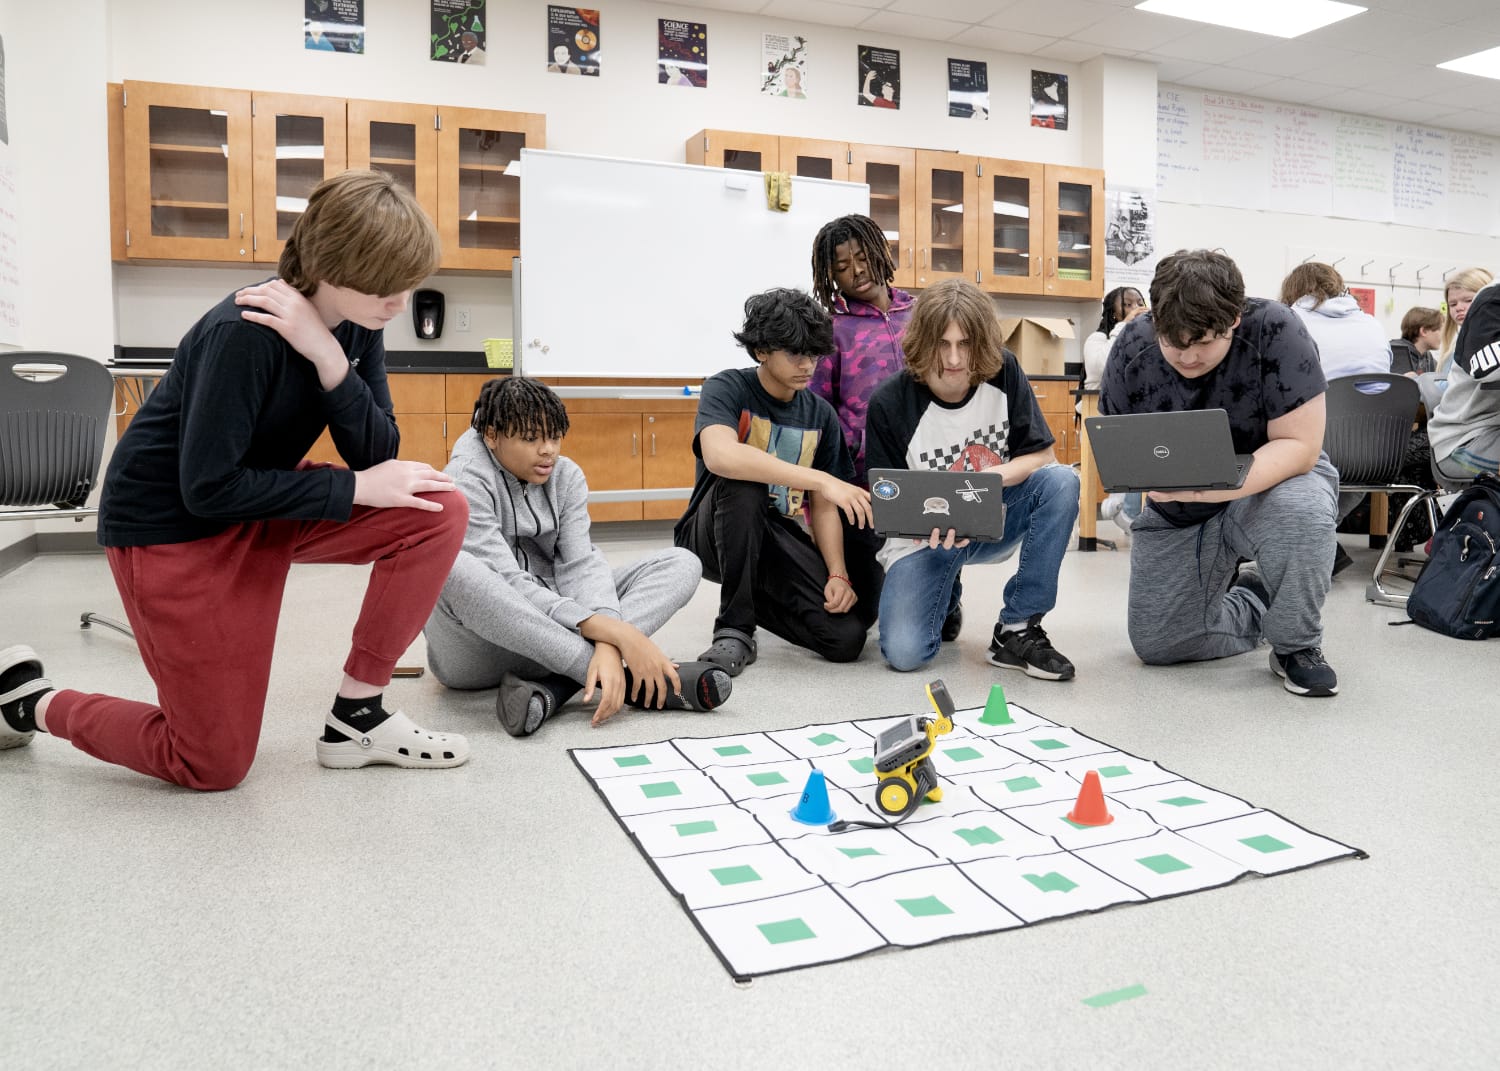 Students with a robotic game on the floor